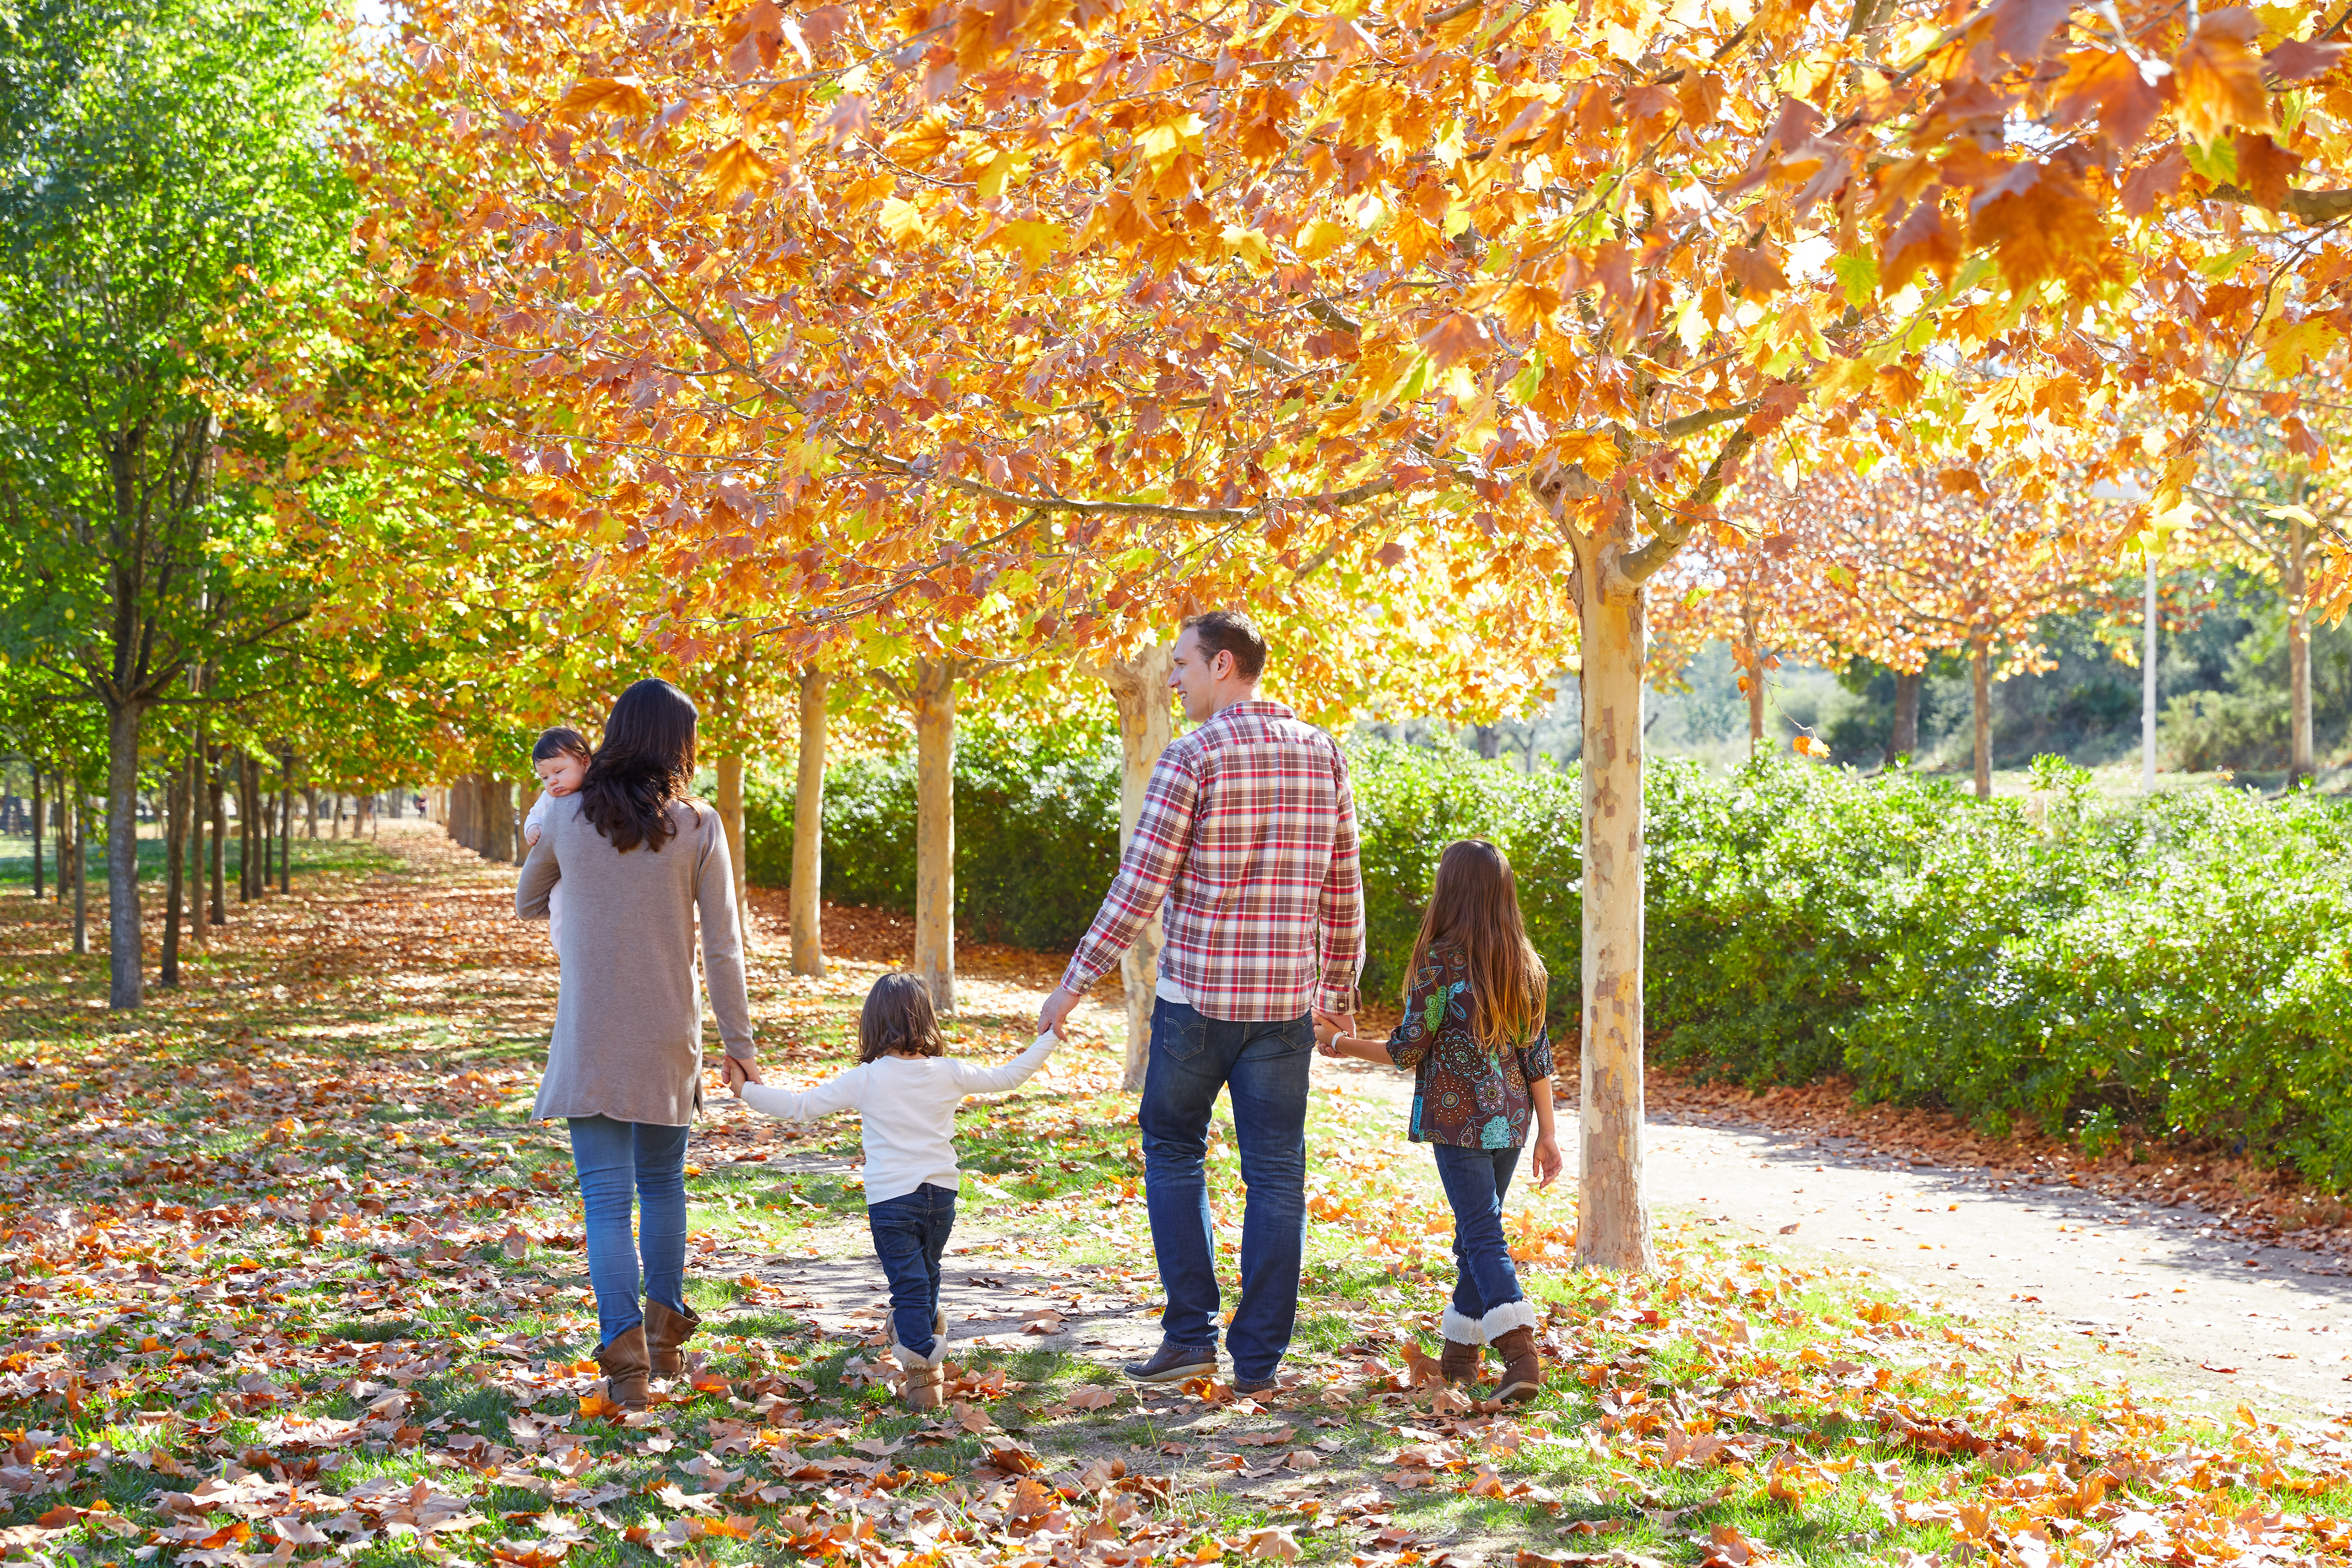 A family with small children walks down a sunny,  grassy path surrounded by fall leaves and trees that are changing color.